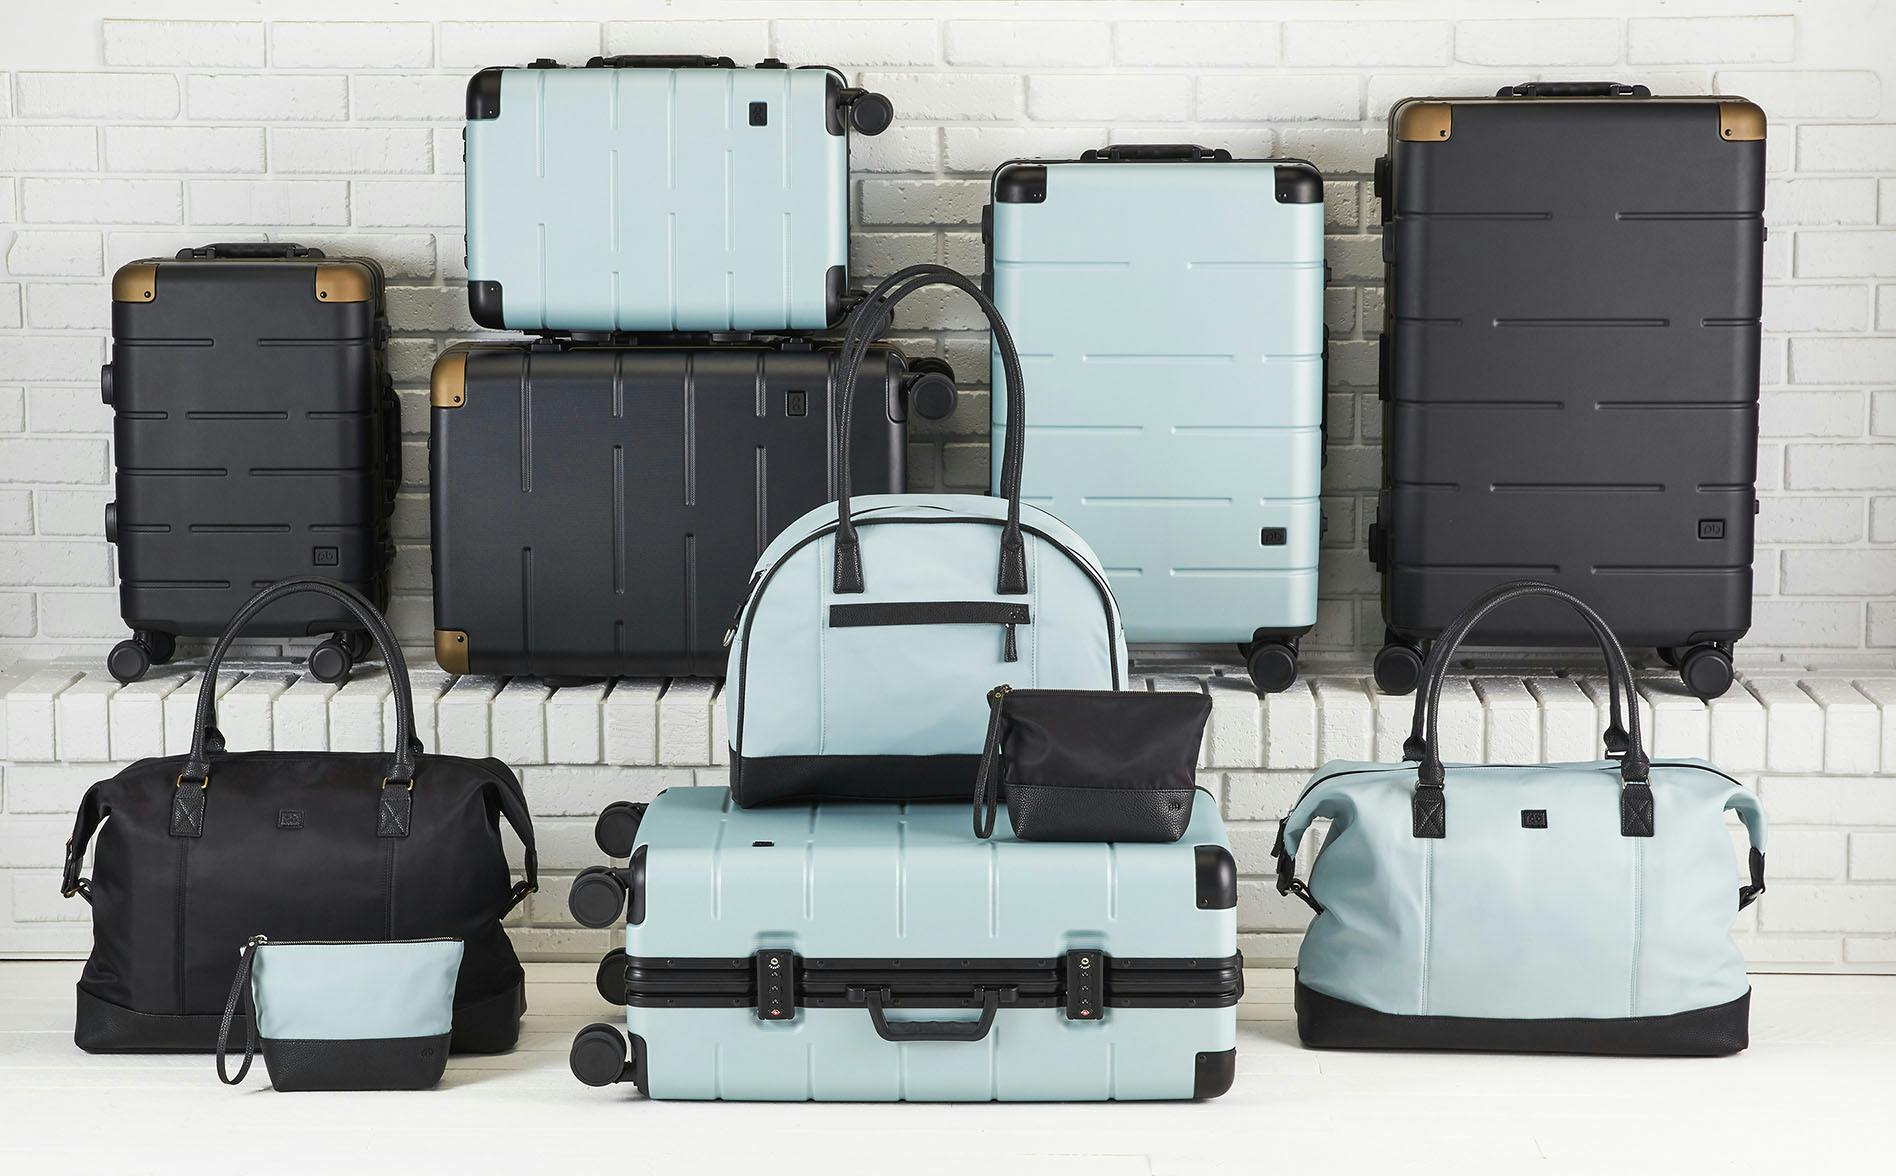 Image from PB showing luggage sets and different colors